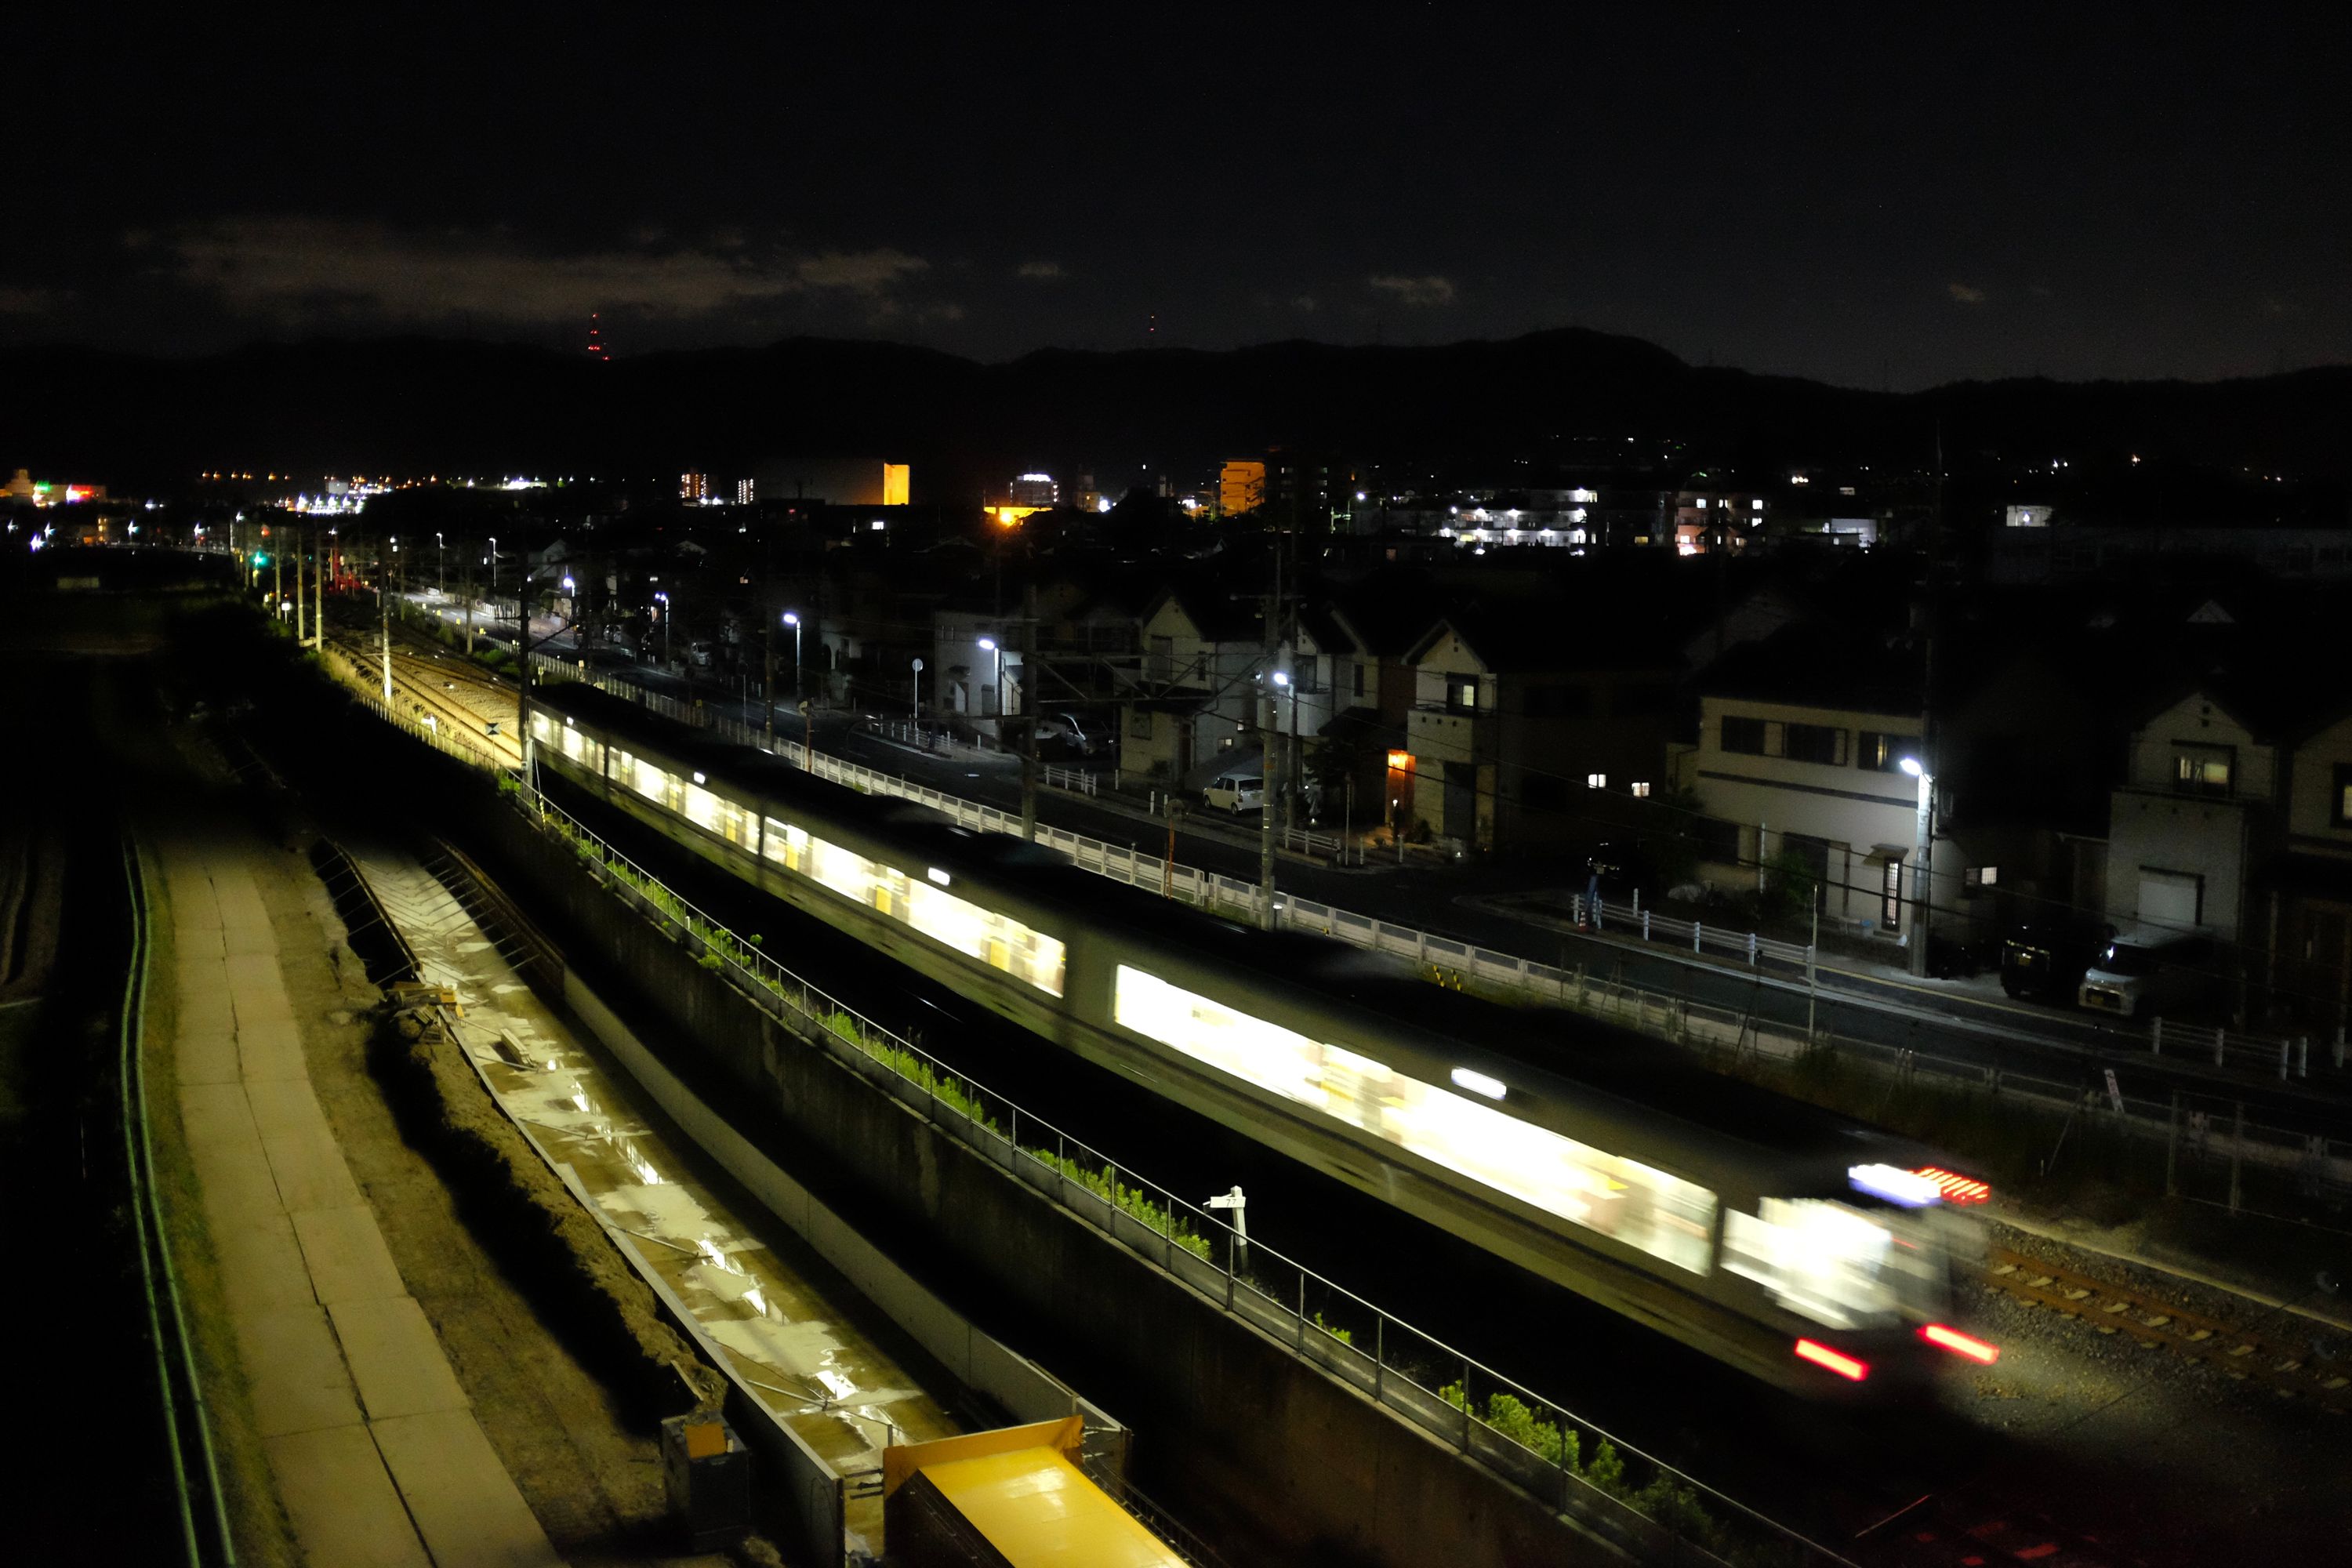 A train pulls into a station at night, against the lights of a city and low hills on the horizon.